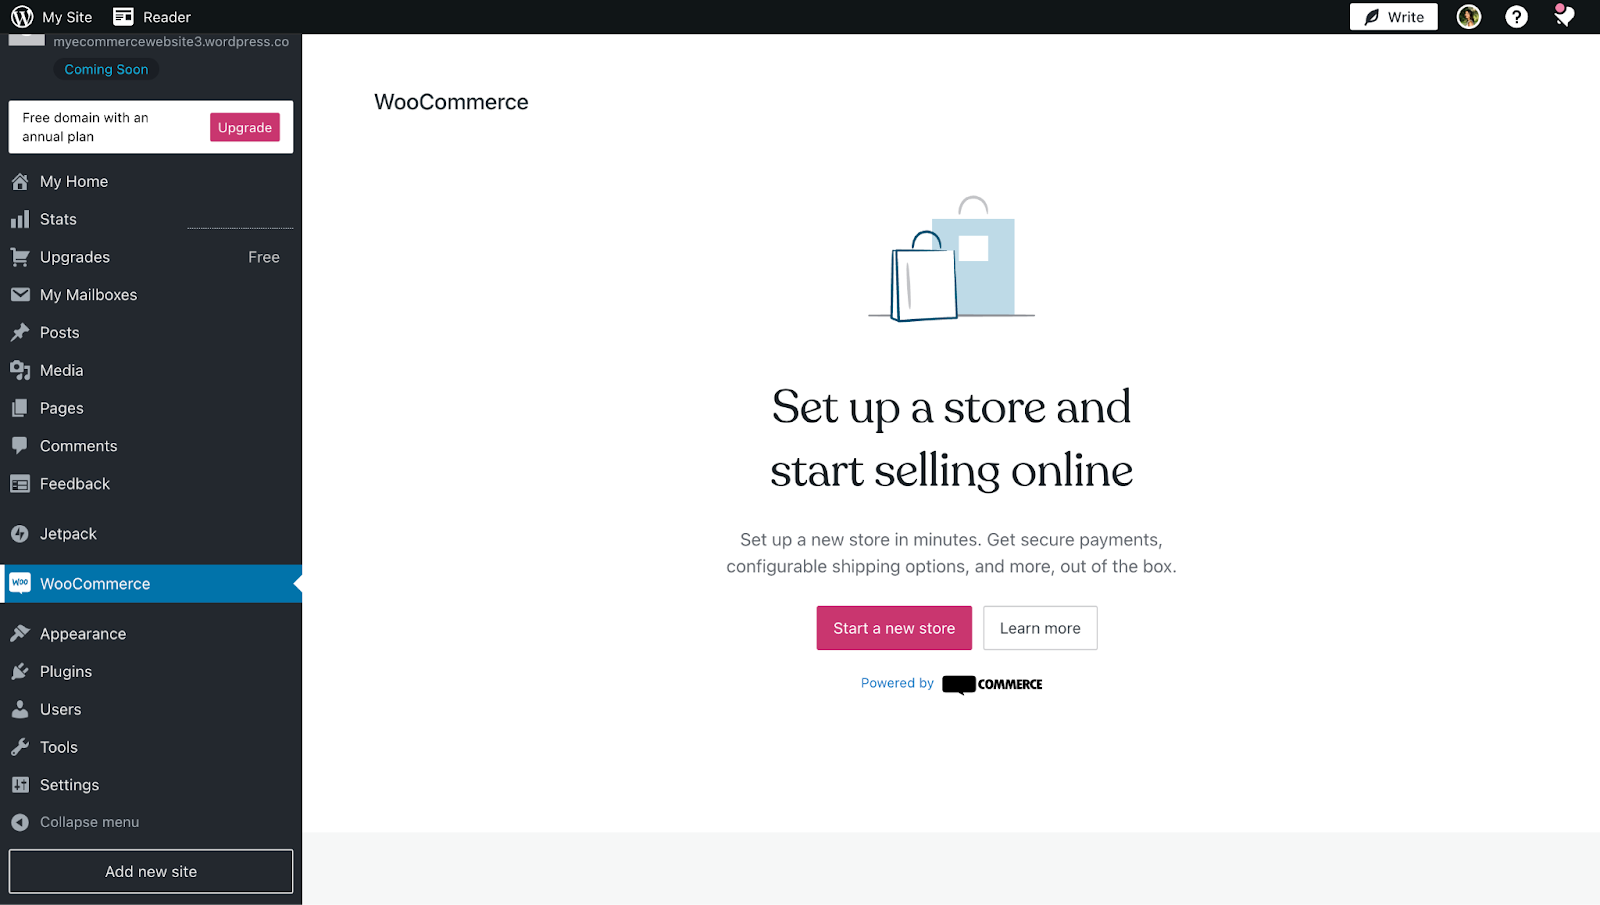 How to make an ecommerce website with WordPress: The WooCommerce dashboard after installing it on my WordPress ecommerce website.